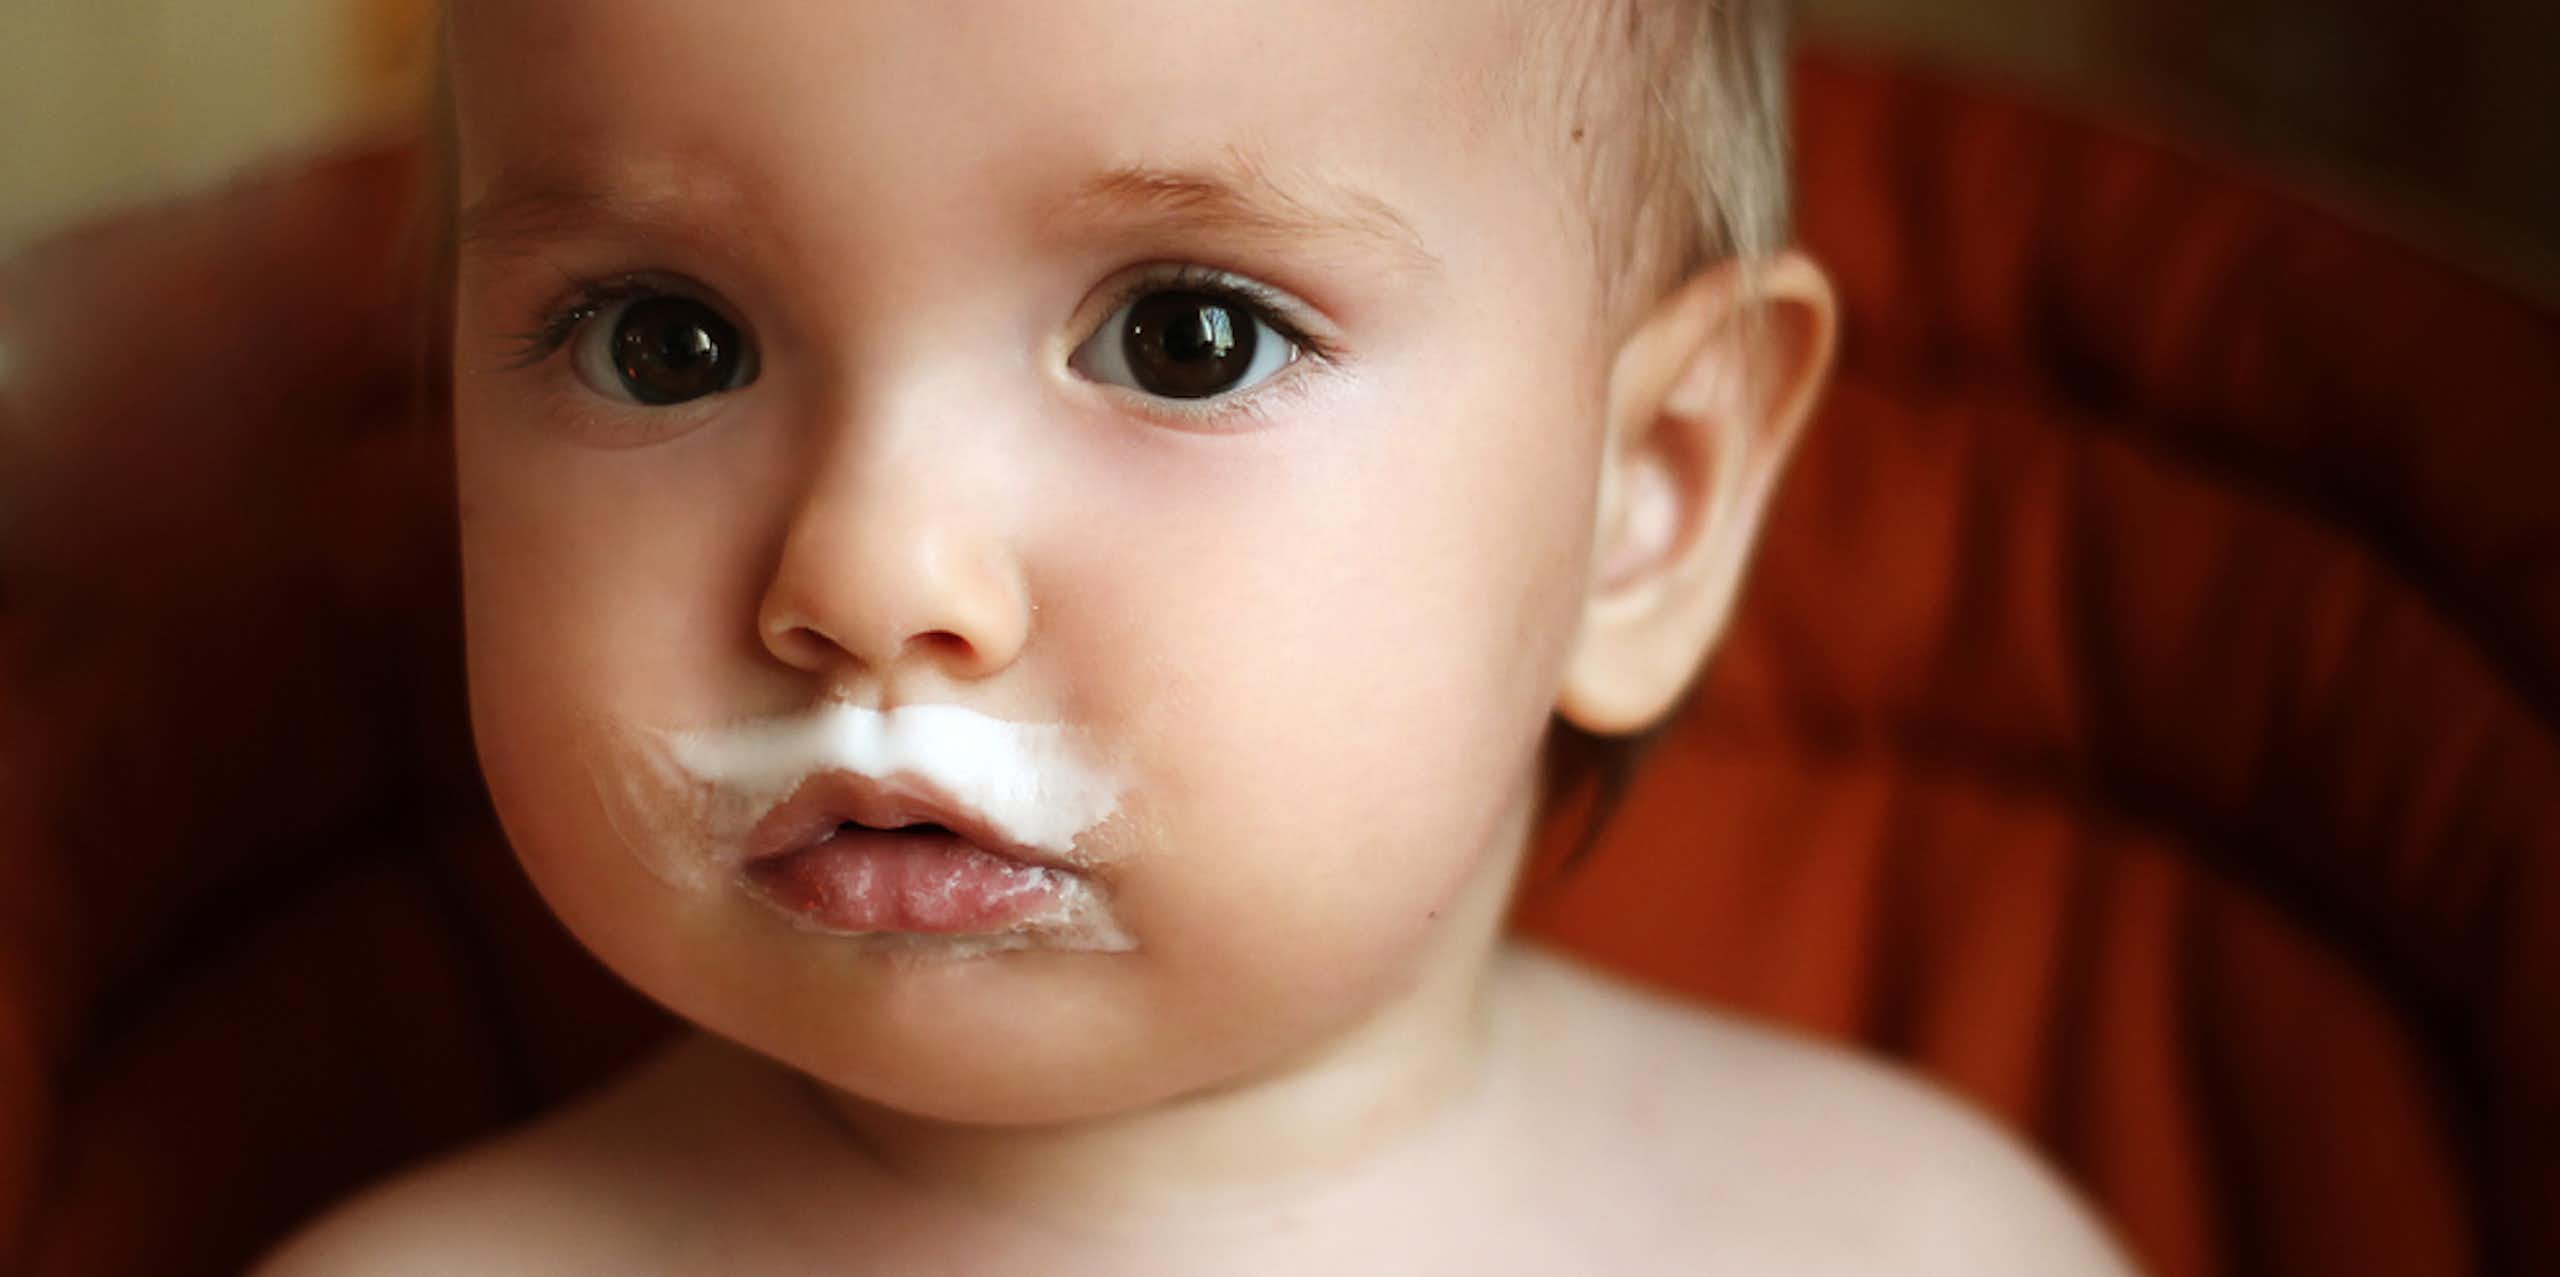 Cute baby with milk around mouth, including a milk mustache